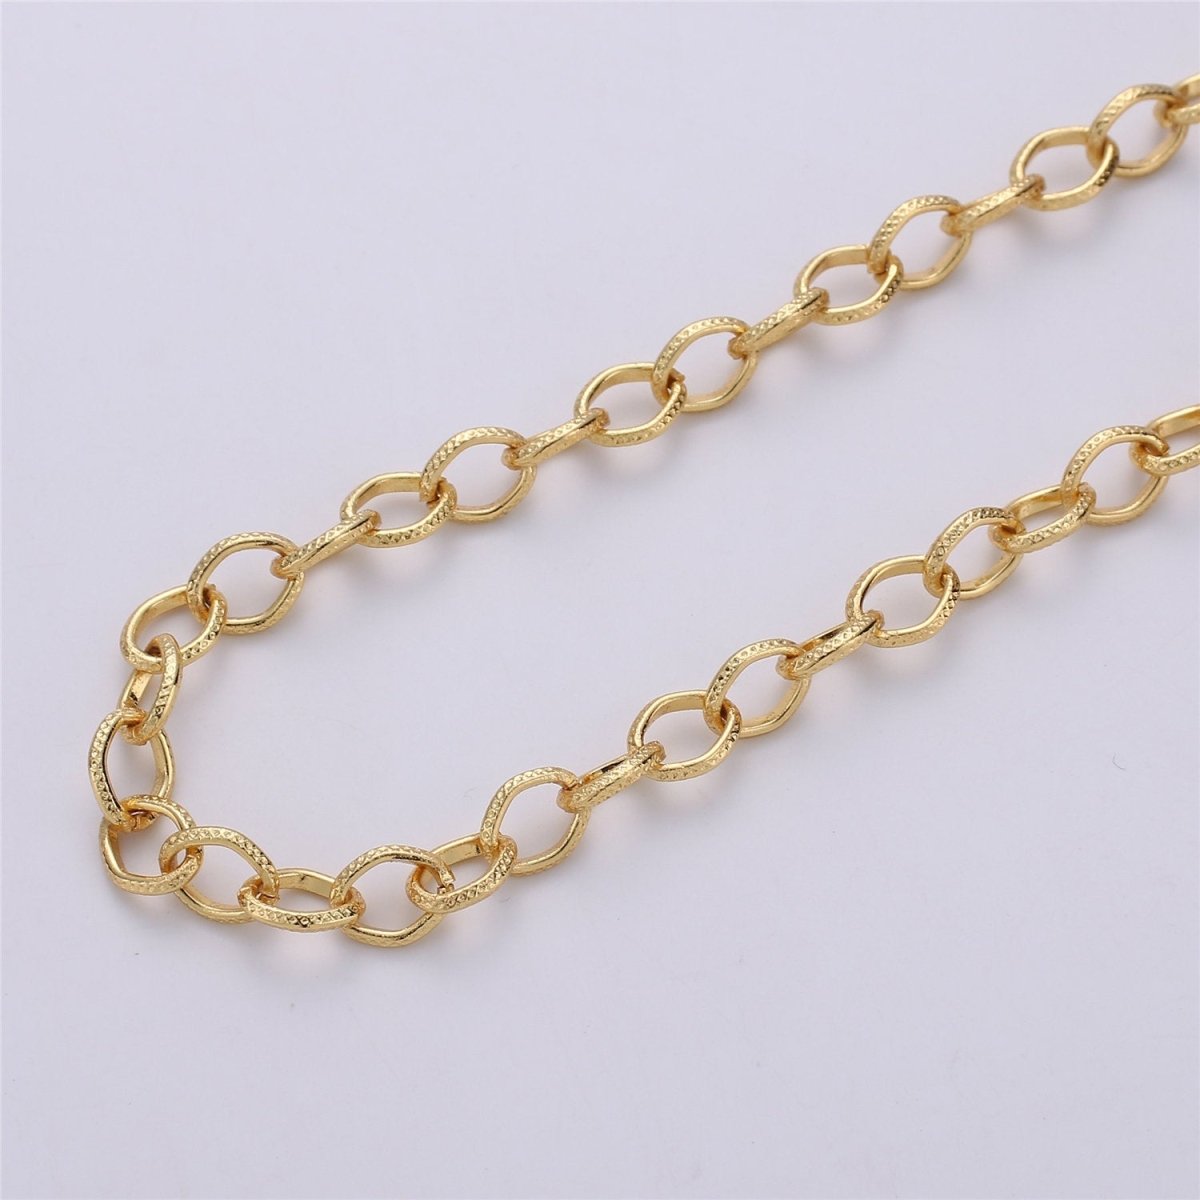 Gold / Silver Cable Chain, Textured Link Chain, 24K Gold Filled Chain by Yard, Unfinished Chain For Bracelet Necklace Supply, 9X10mm| ROLL-094, ROLL-098 Clearance Pricing - DLUXCA